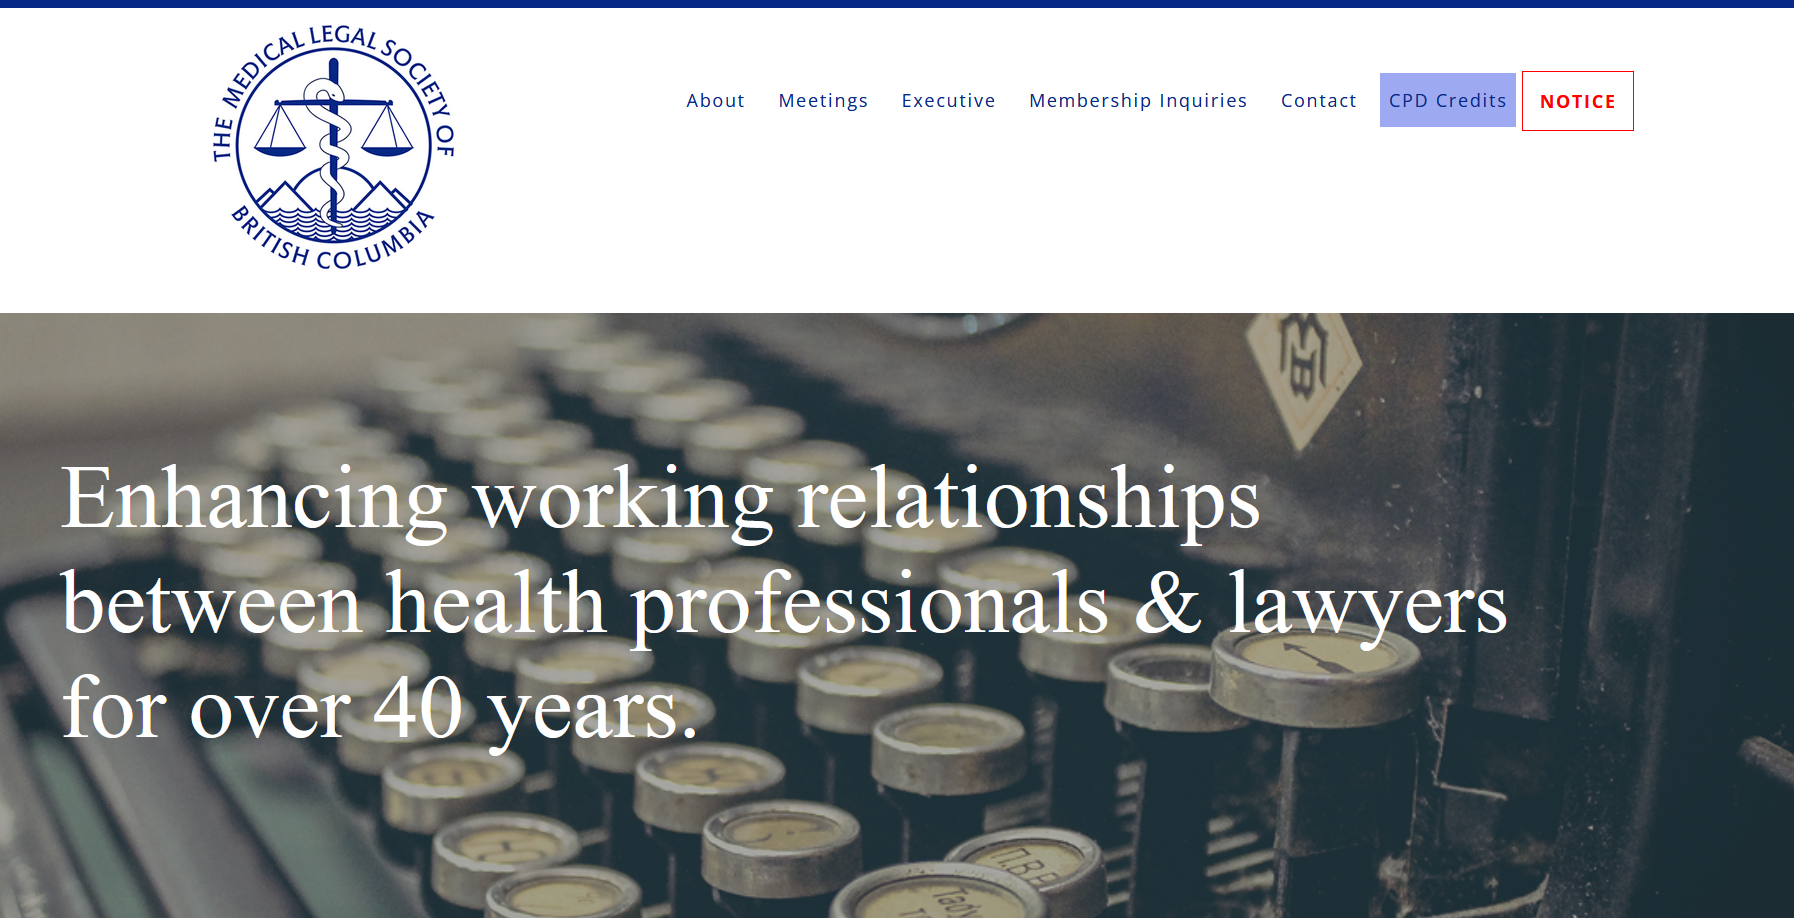 The Medical Legal Society of British Columbia